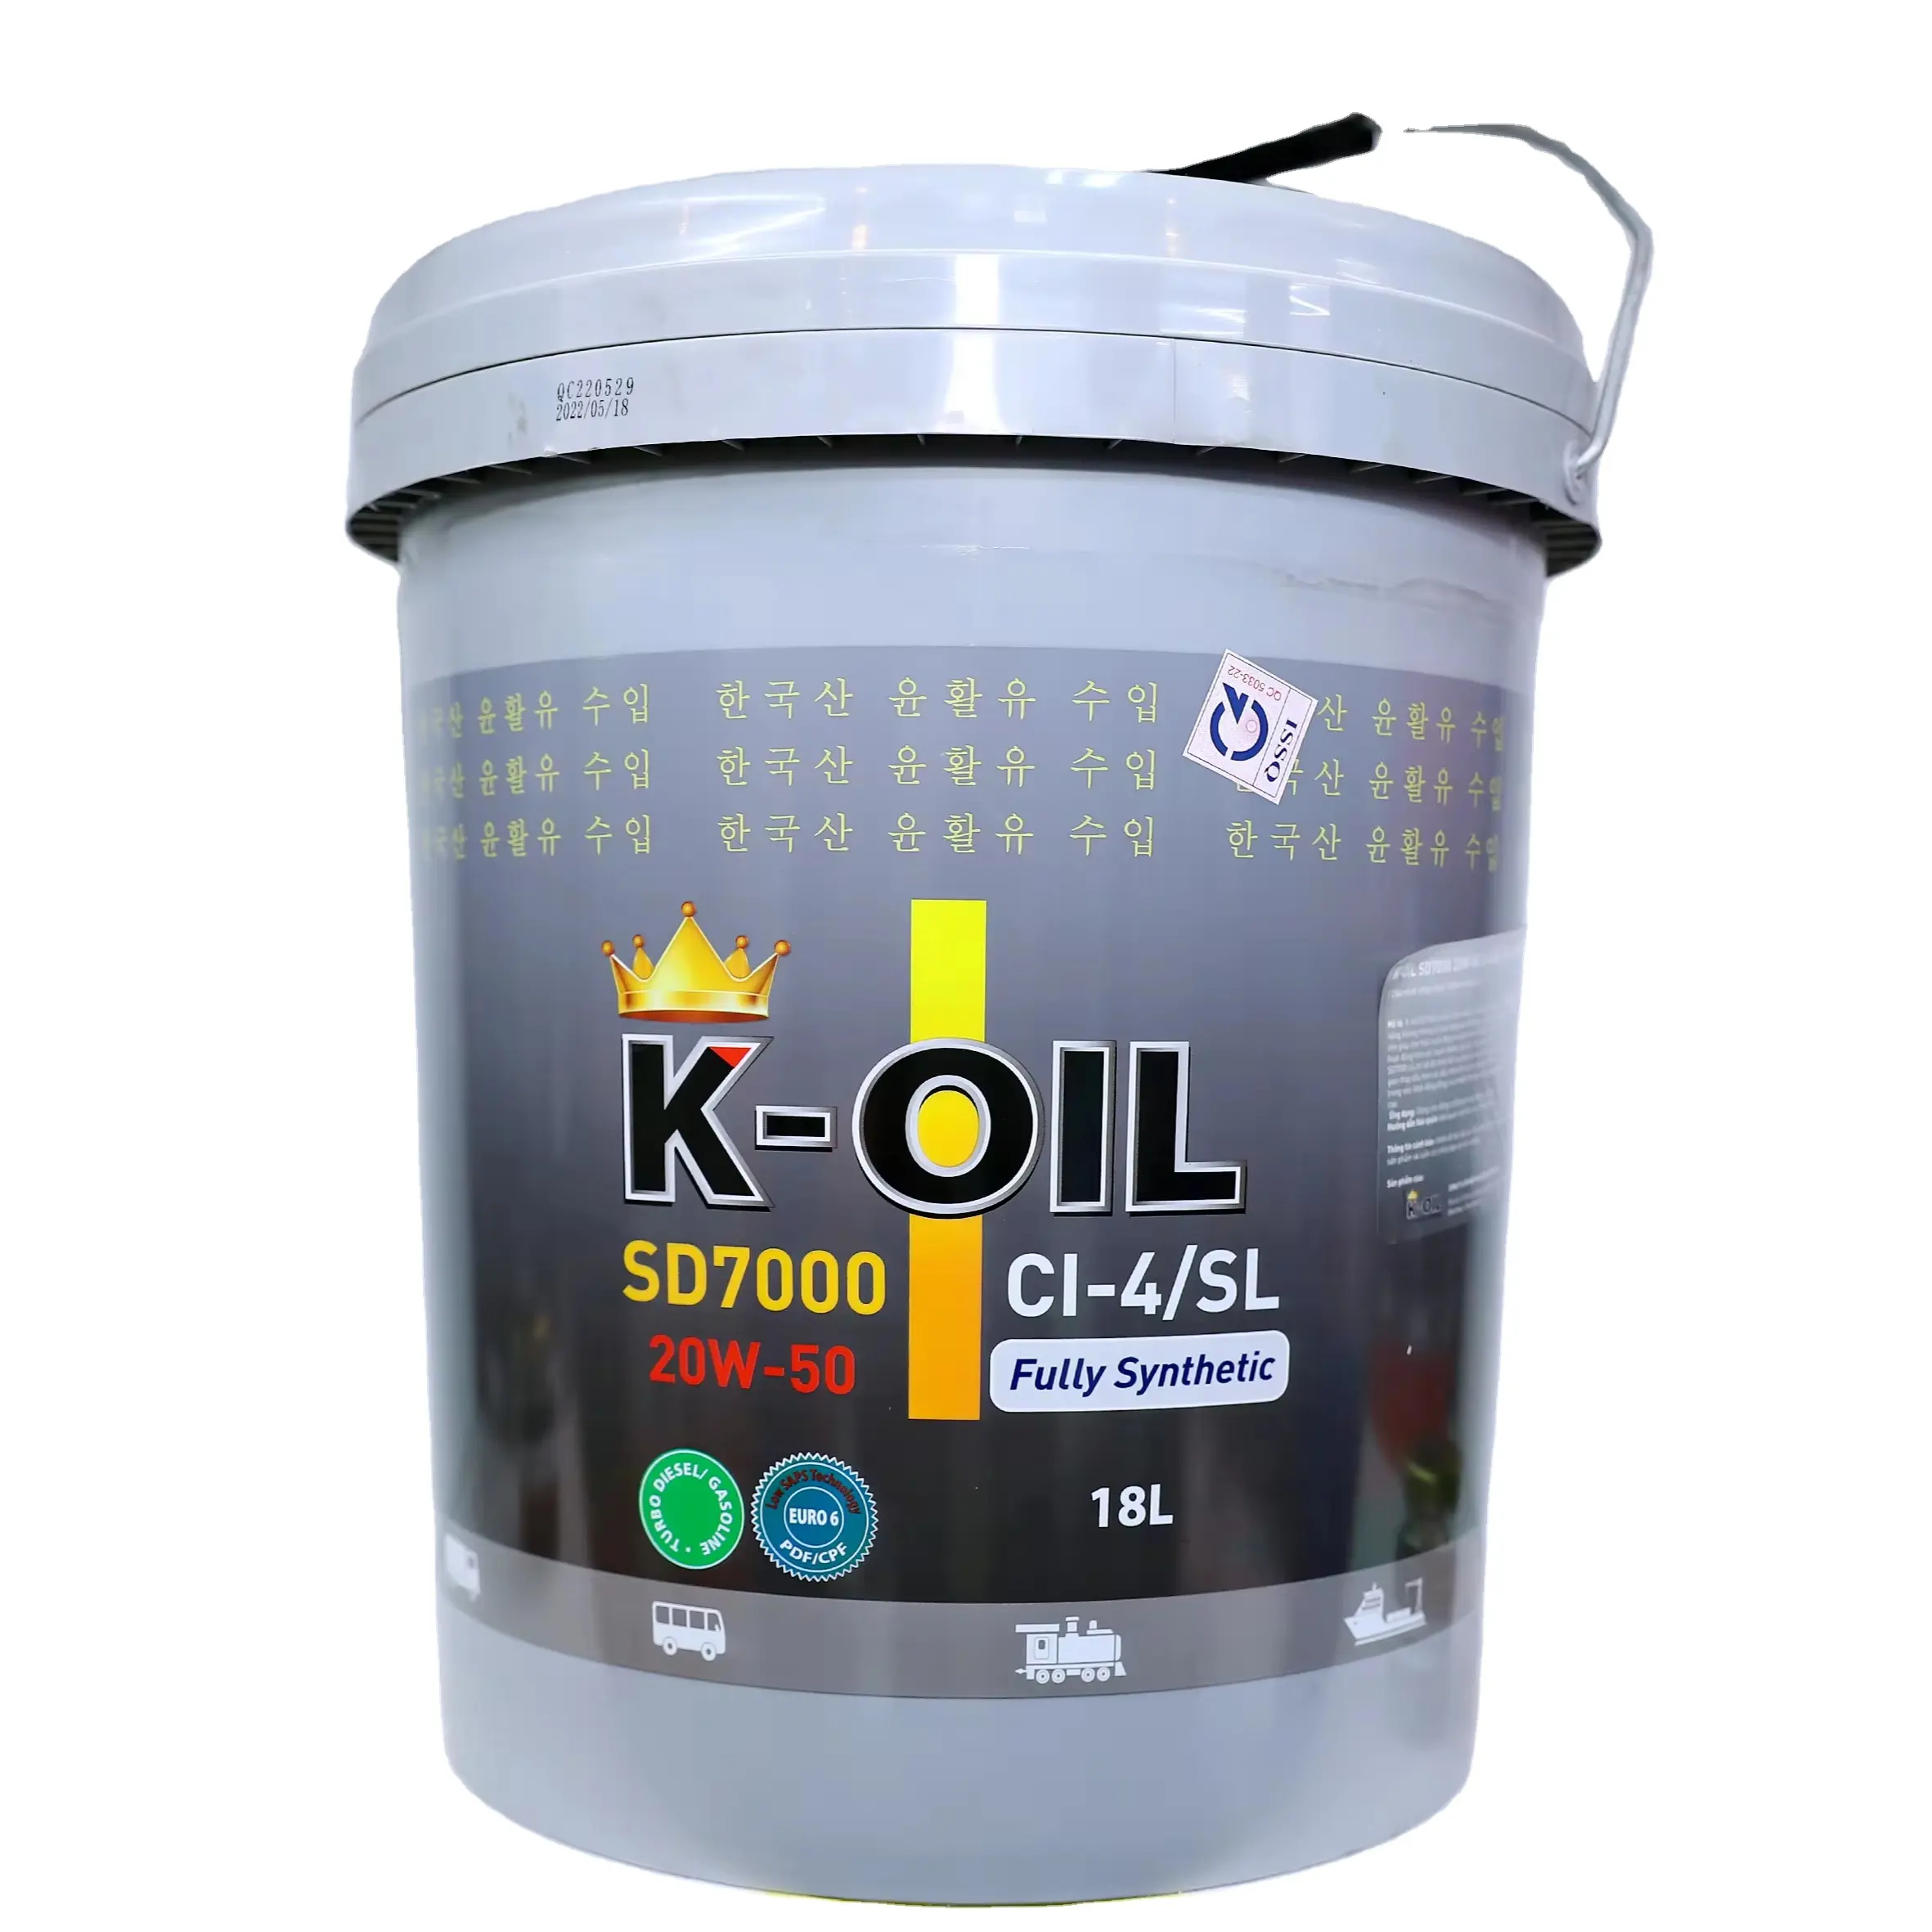 K-Oil SD7000 15W40/20W50 CI-4/SL with stand high temperature and factory price application for industrial machines Vietnam